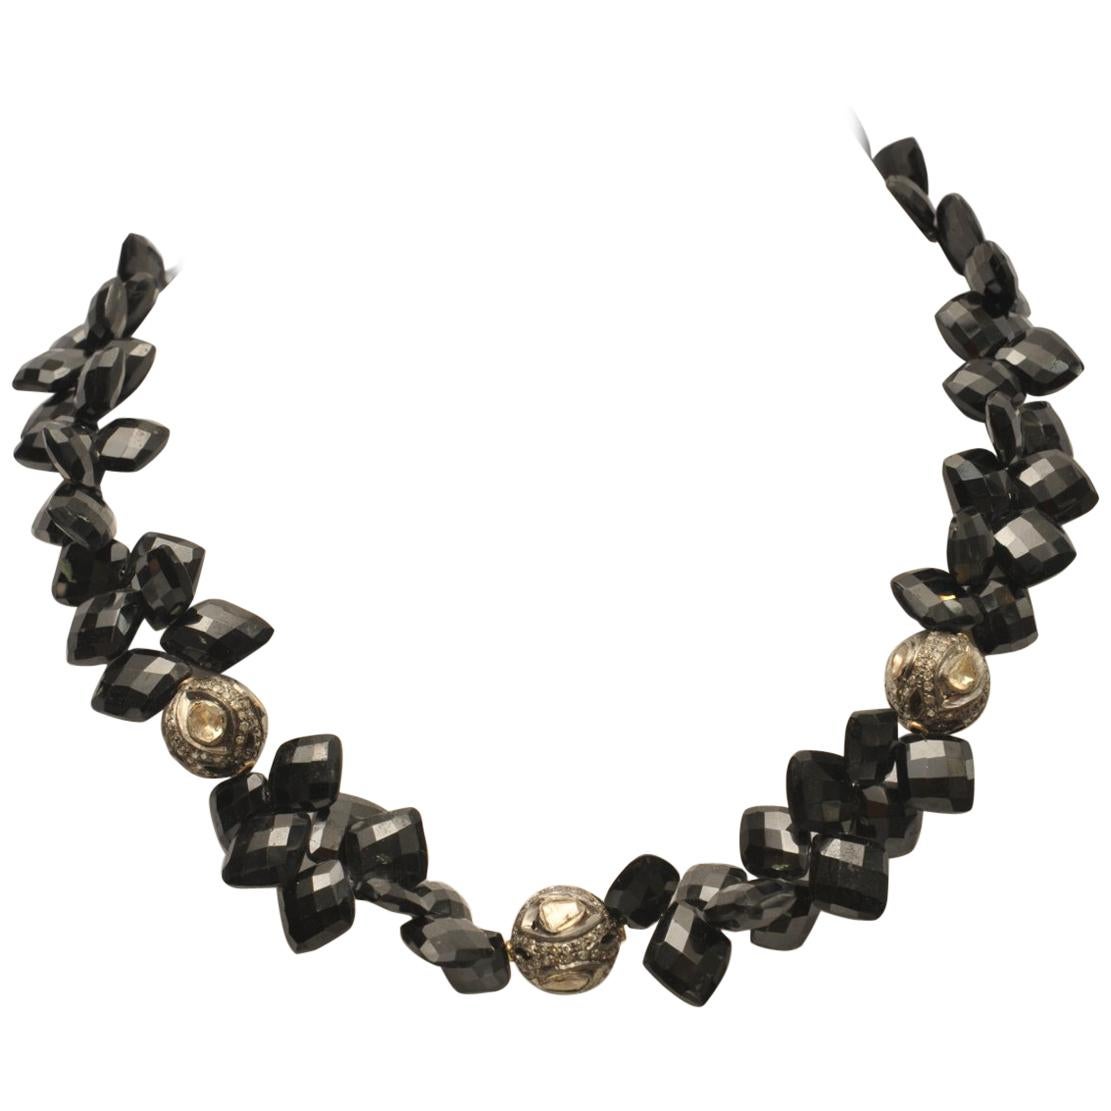 Faceted Black Onyx and Diamond Beaded Necklace by Deborah Lockhart Phillips